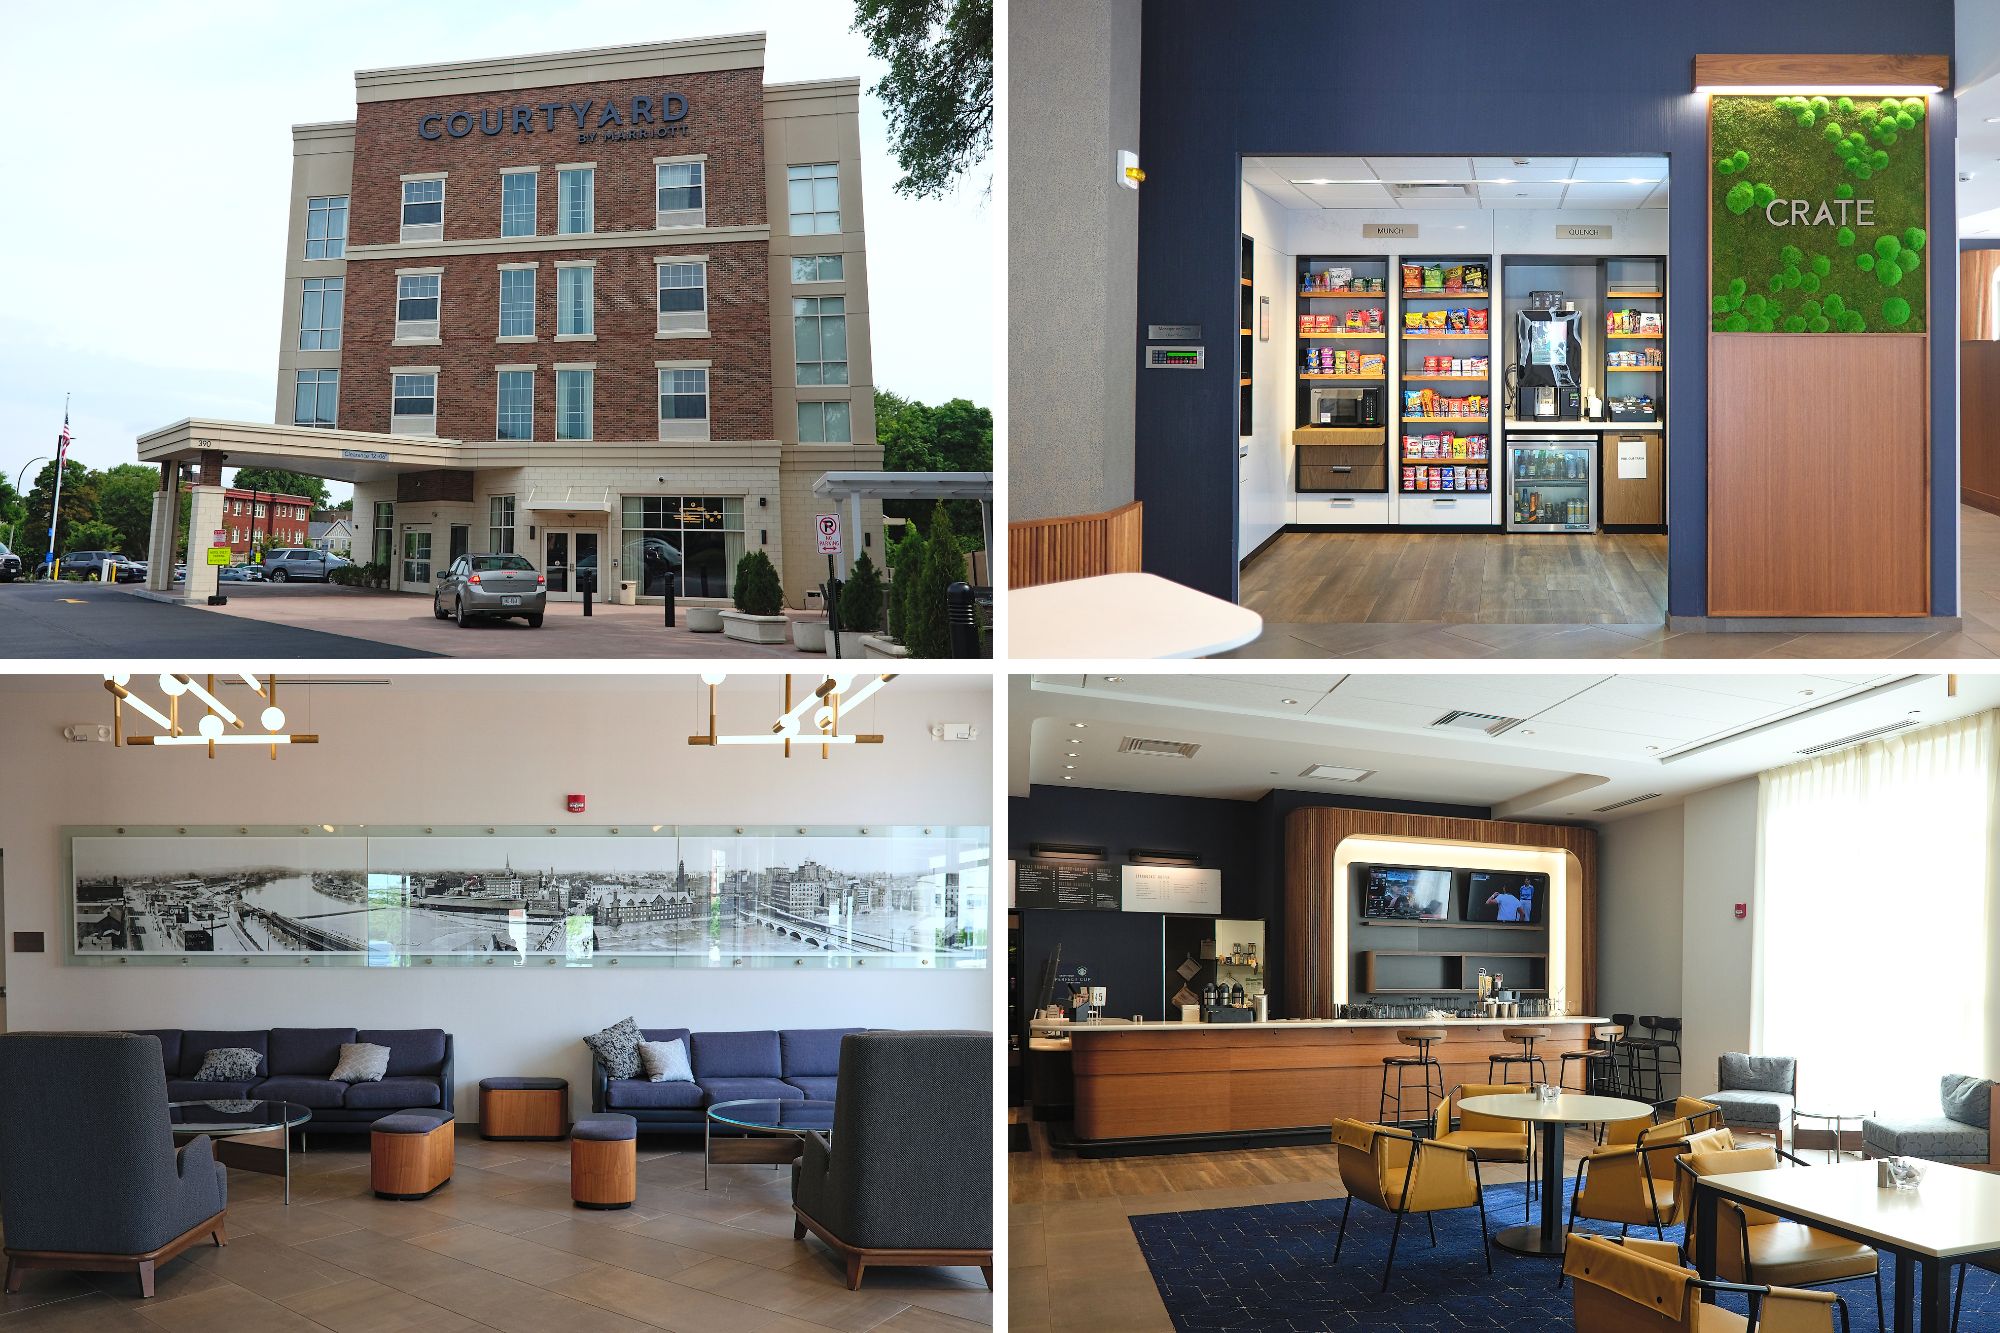 Four images of the common areas at the Courtyard by Marriott Rochester Downtown